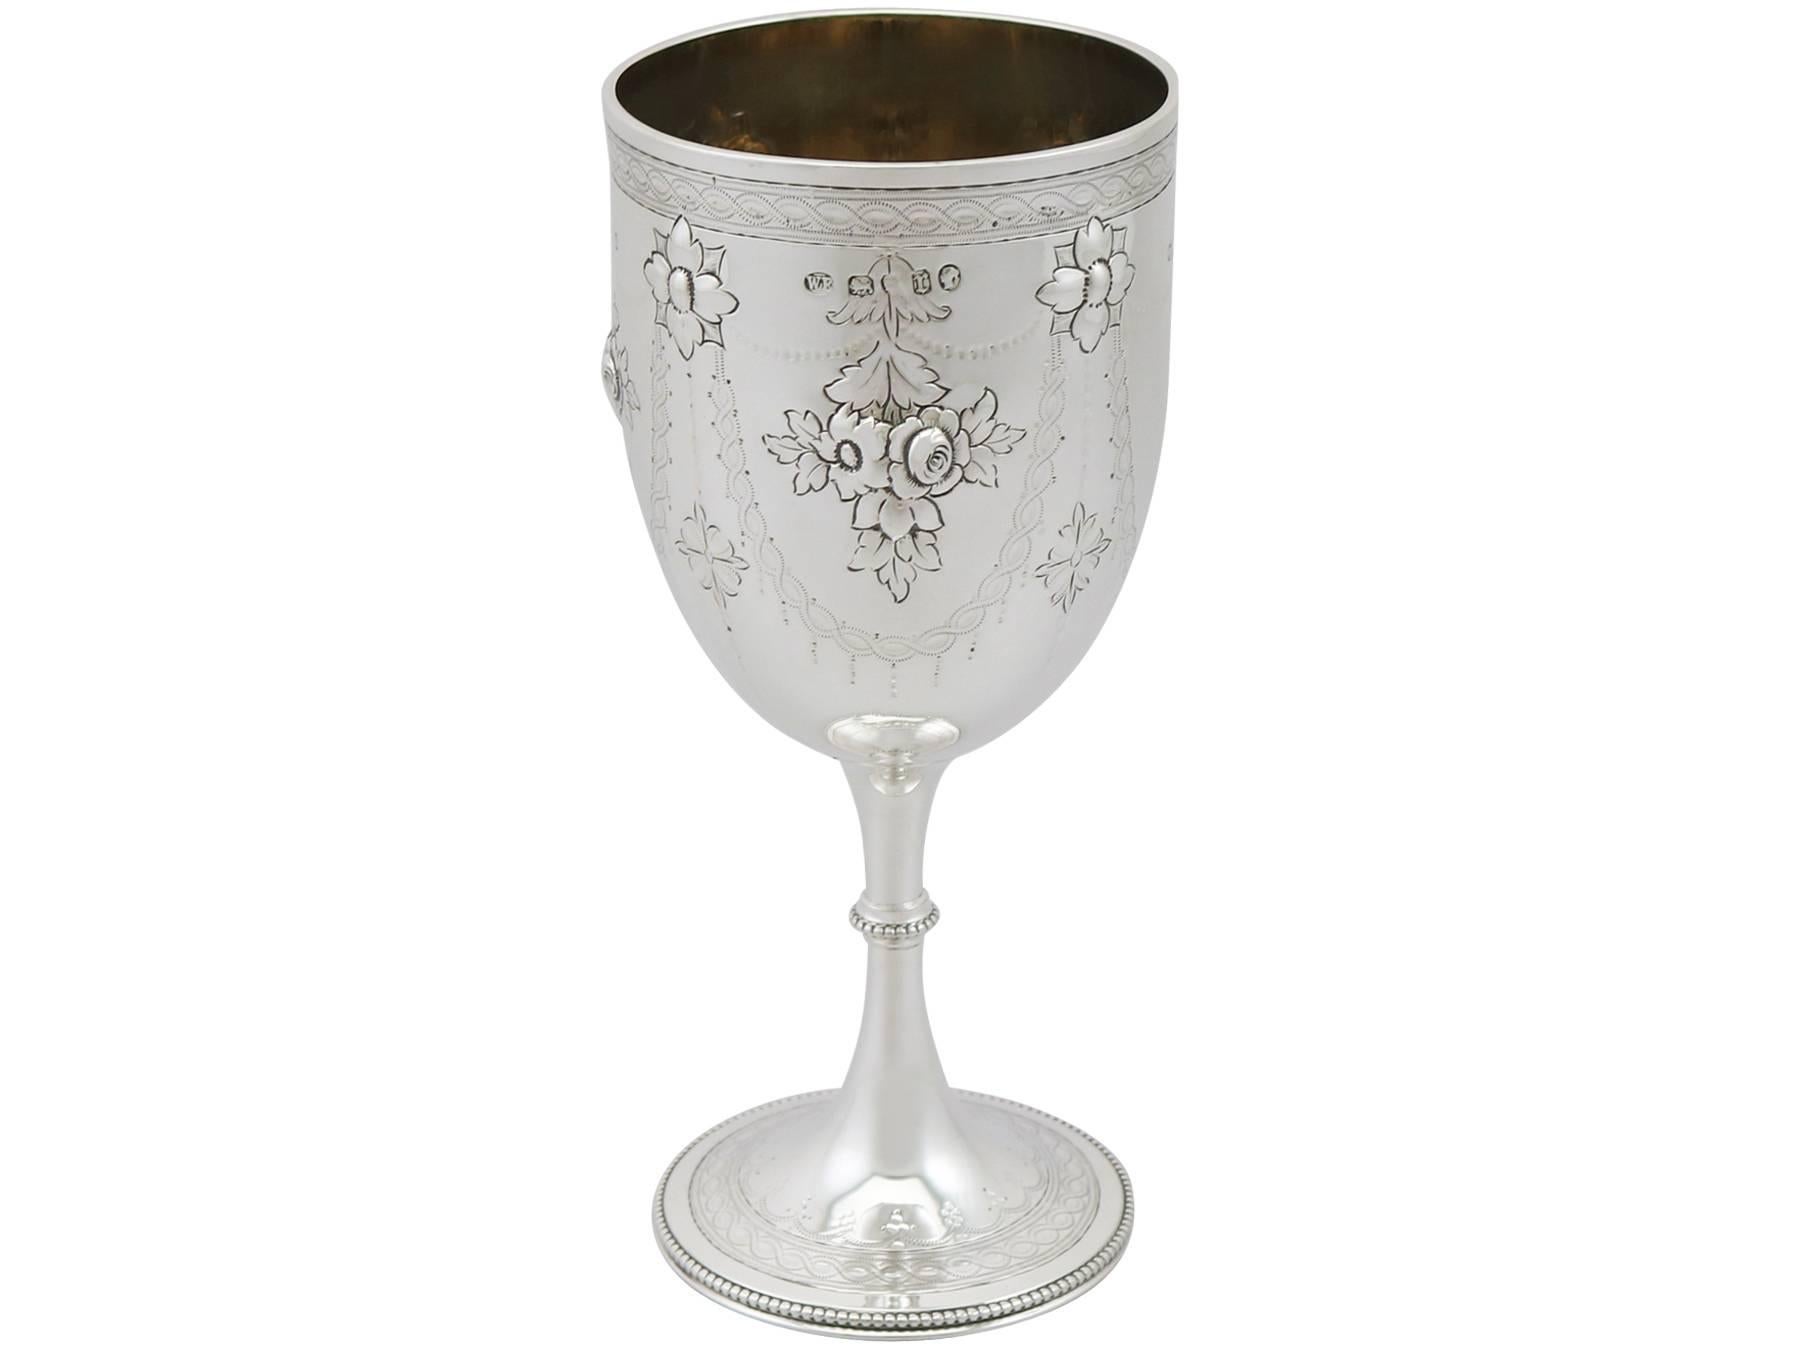 An exceptional, fine and impressive antique Victorian English sterling silver goblet made by William Evans; an addition to our collection of wine and drinks related silverware.

This exceptional antique sterling silver drinking goblet has a